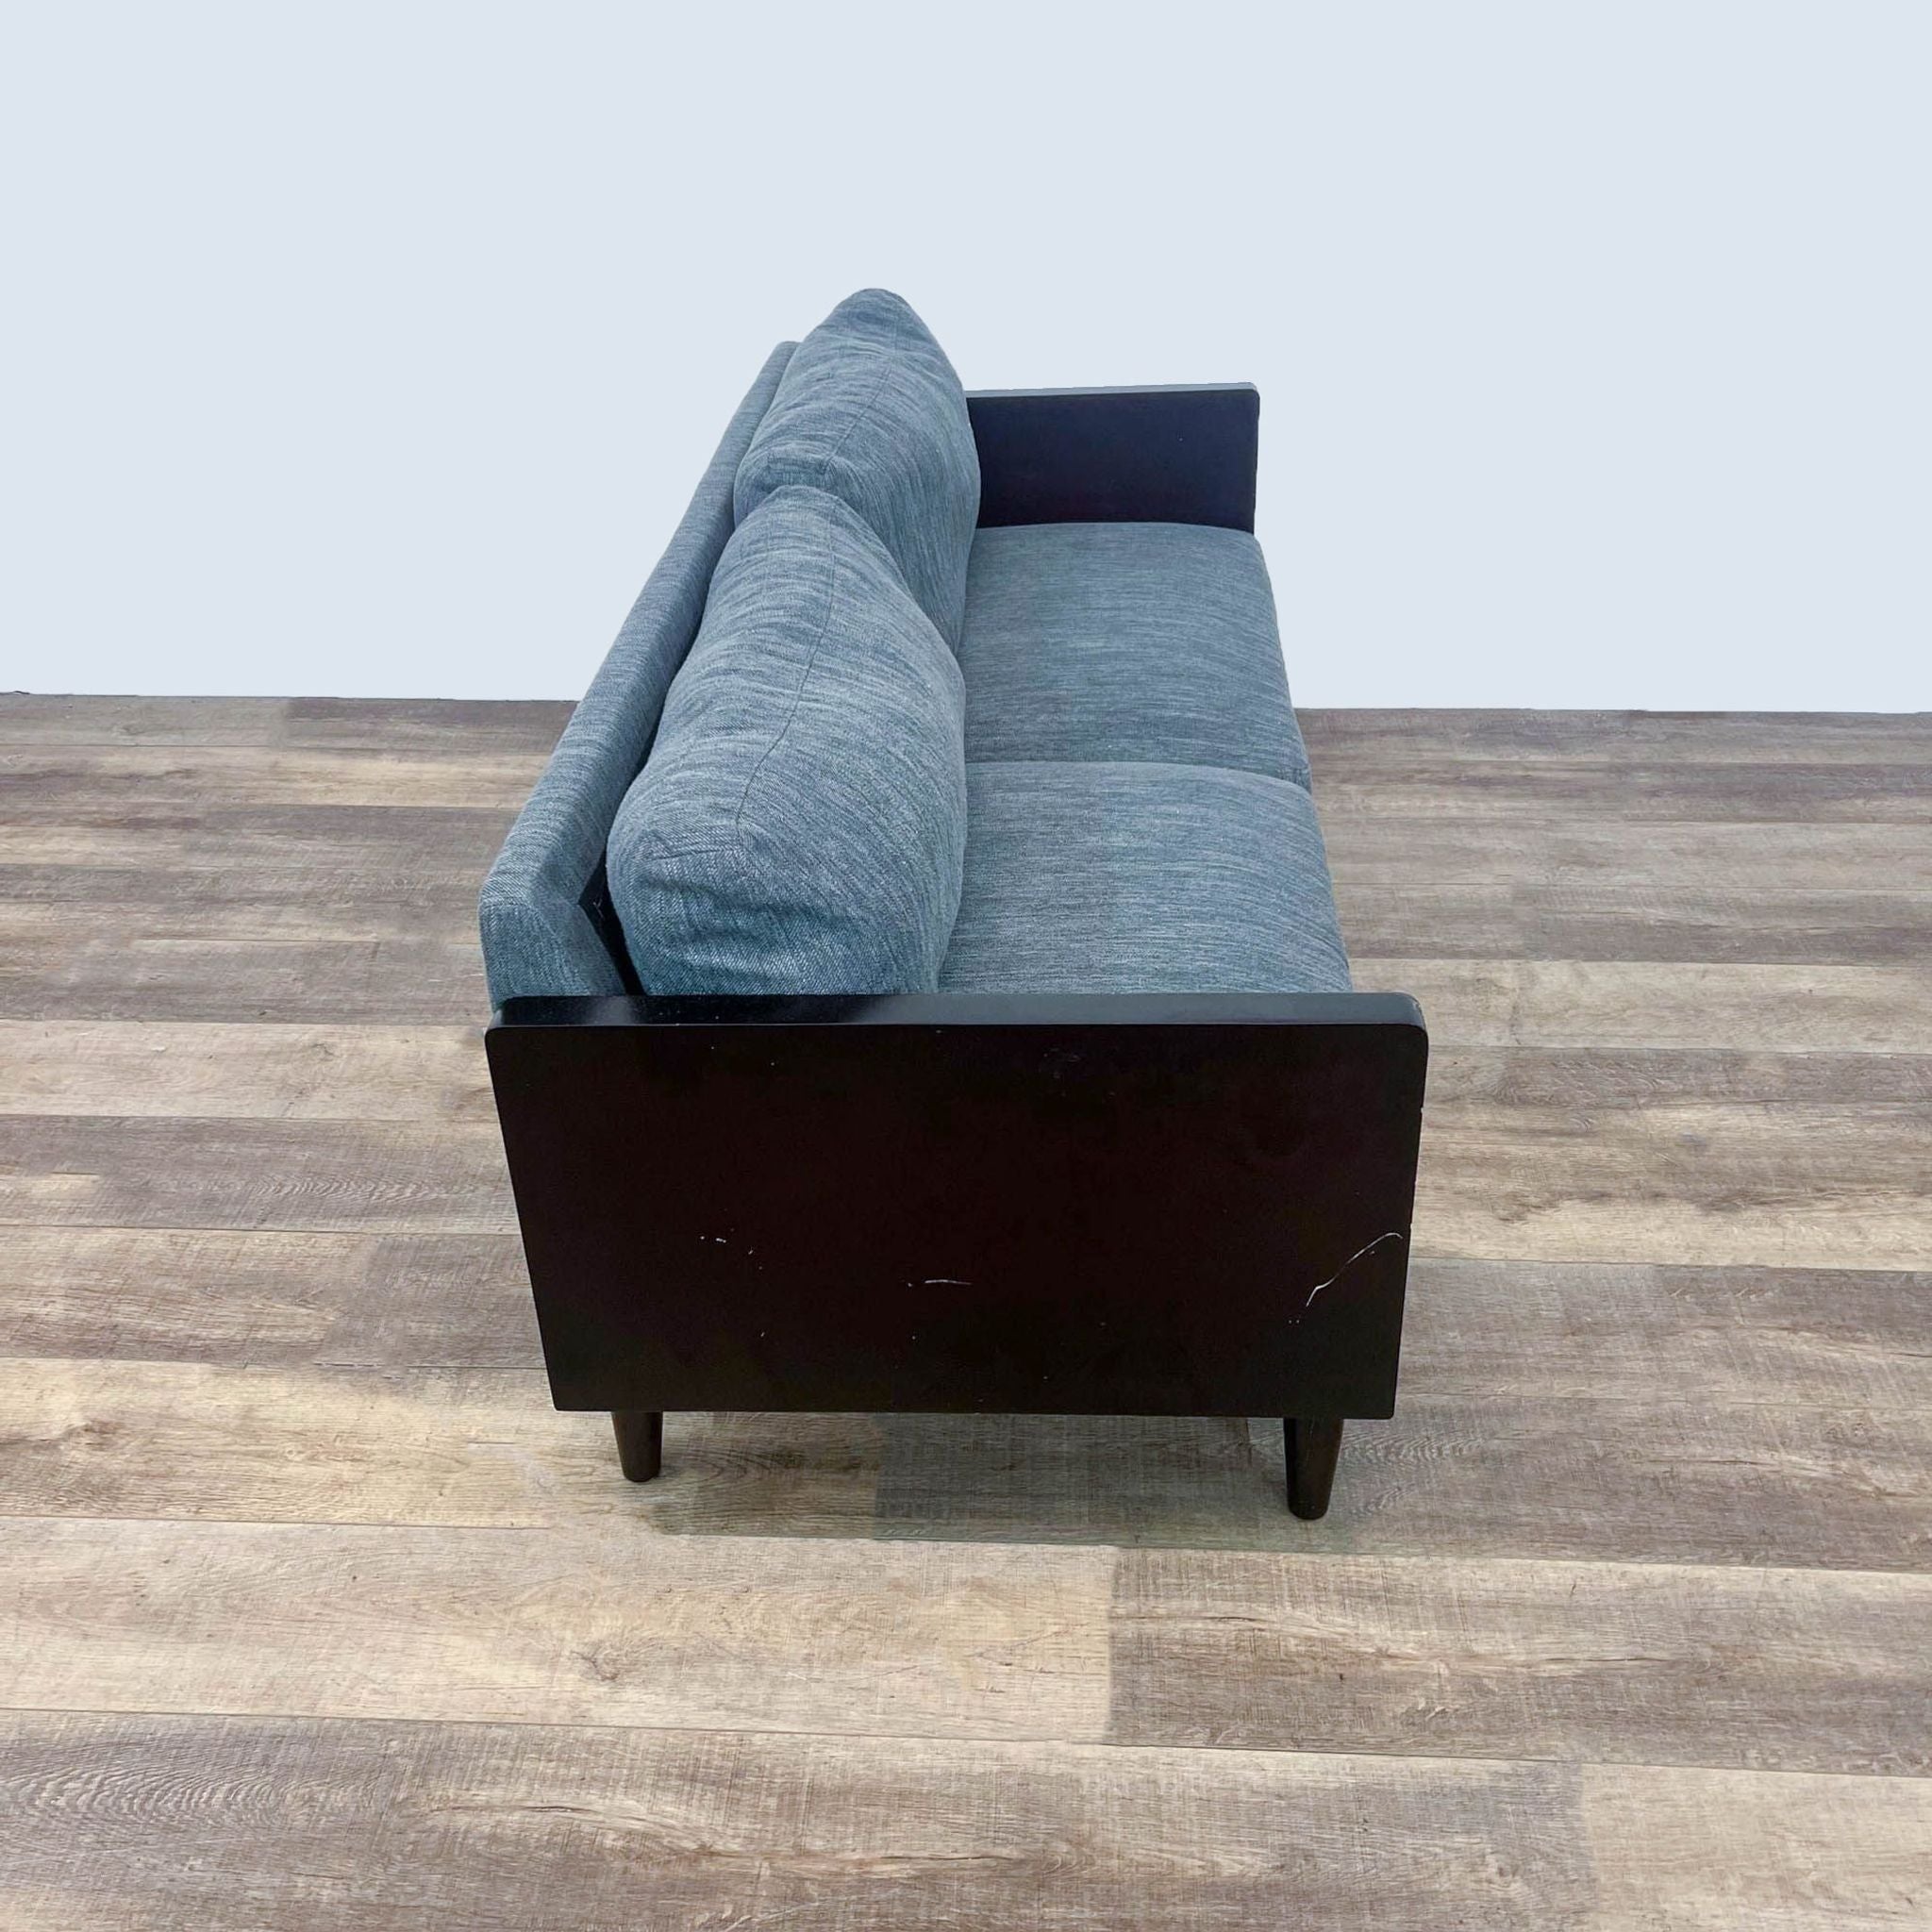 Gray Noble Home loveseat with dark wood arms and feet on a wooden floor.